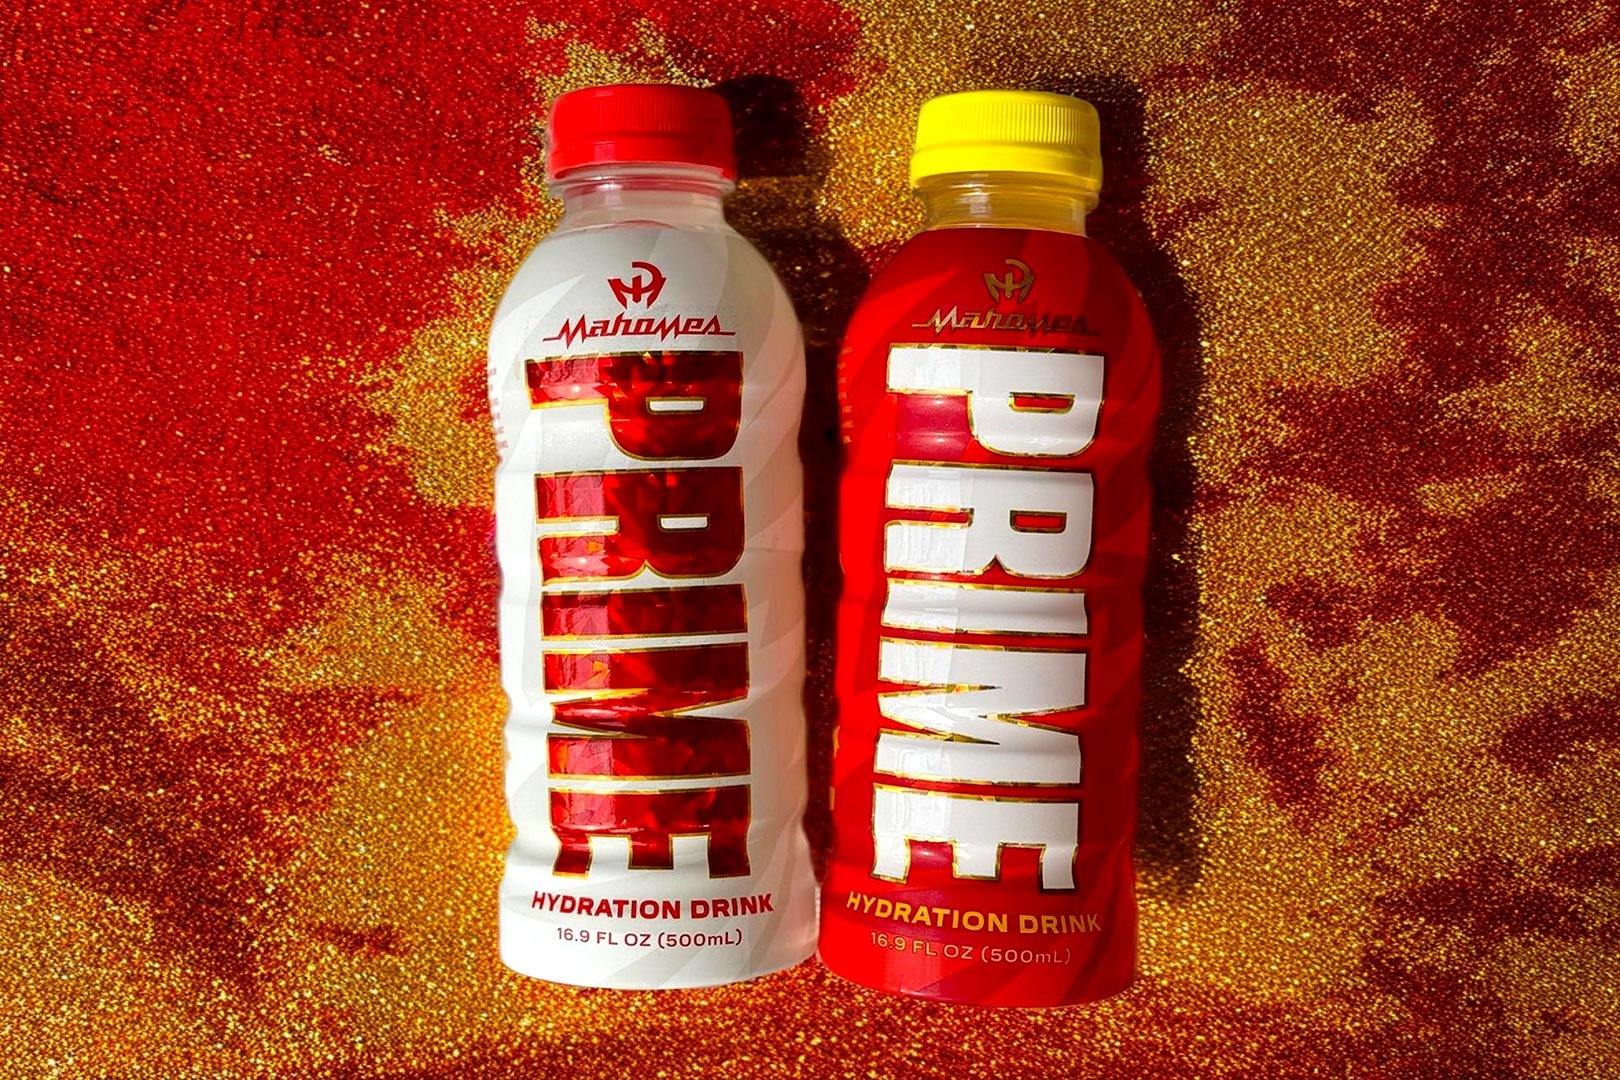 Mahomes Prime Hydration Drink